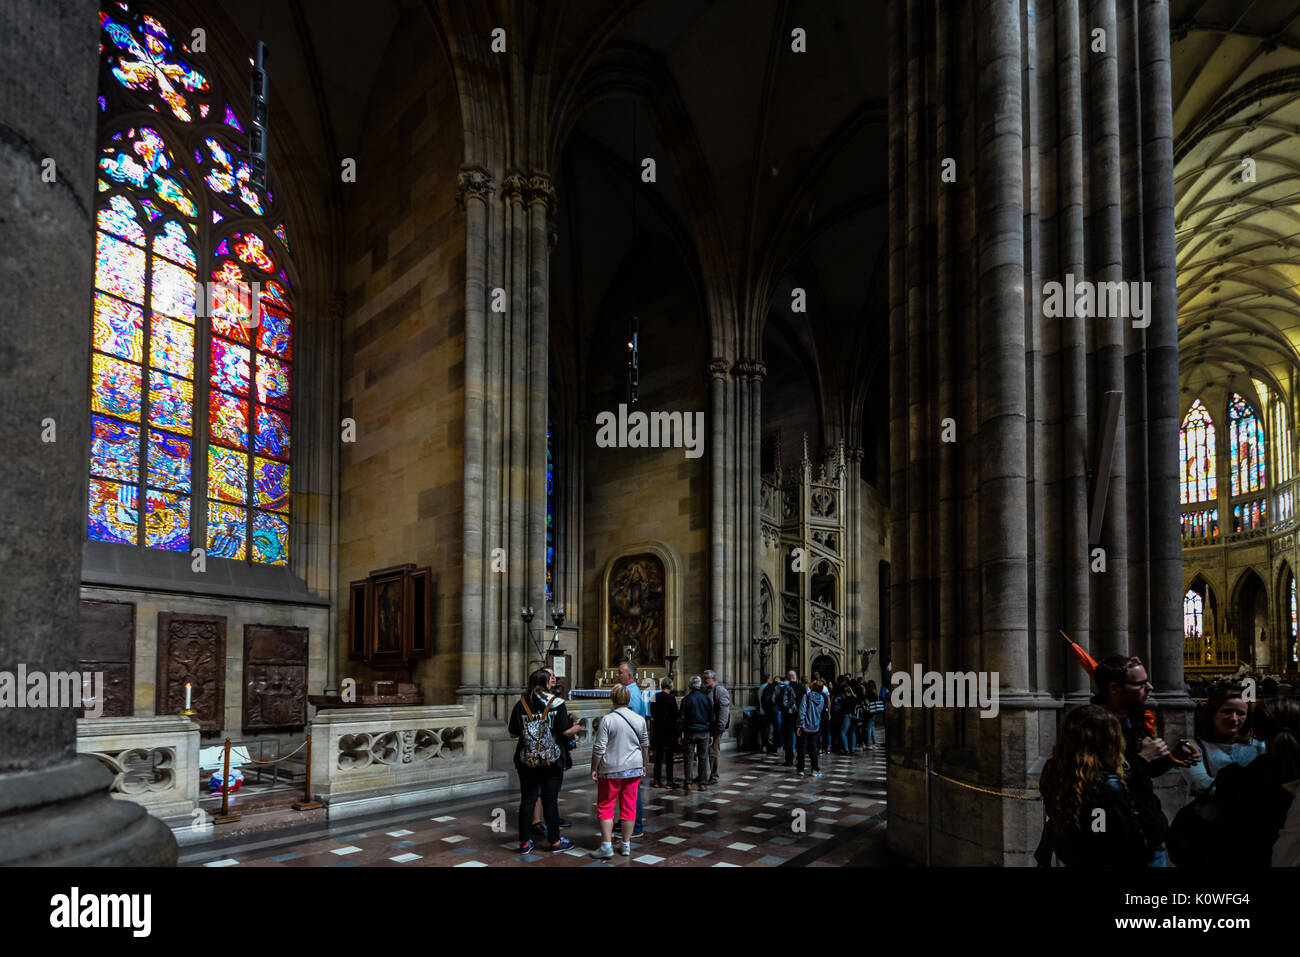 The beautiful gothic interior of St Vitus Cathedral in Prague as tourists and worshipers enjoy the stained glass windows and architecture Stock Photo